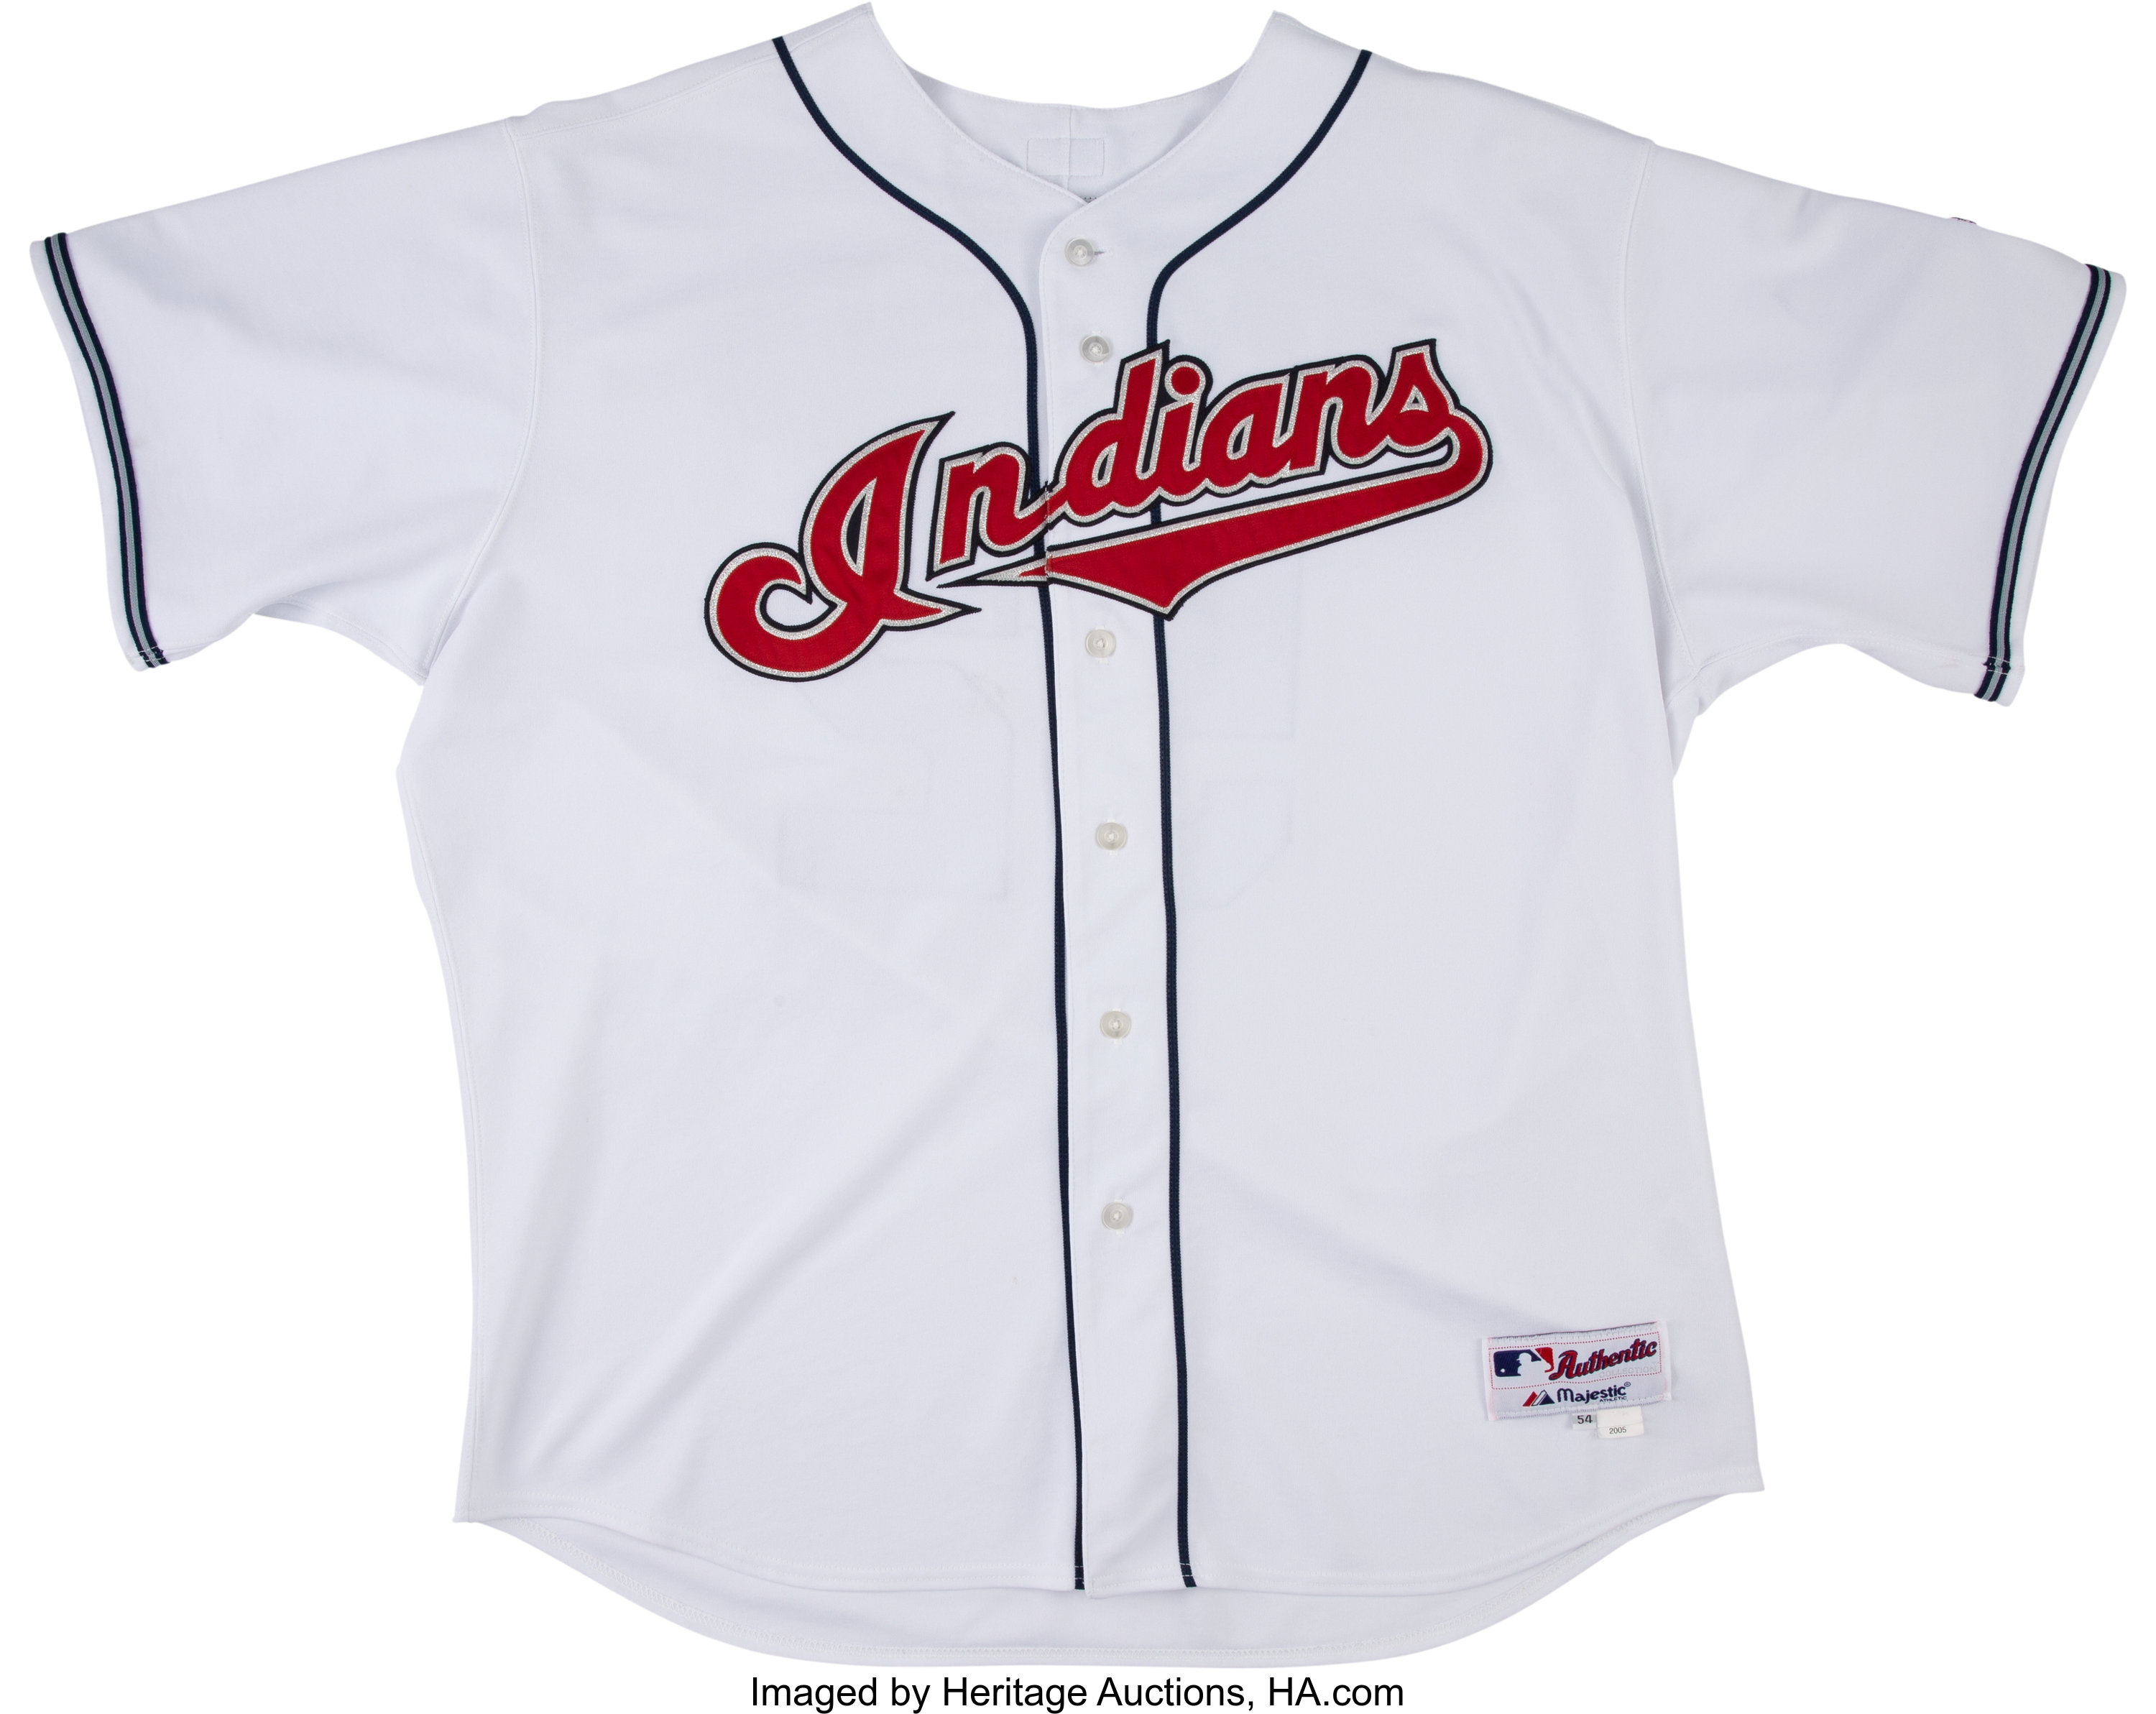 Cleveland Indians Authentic Jersey